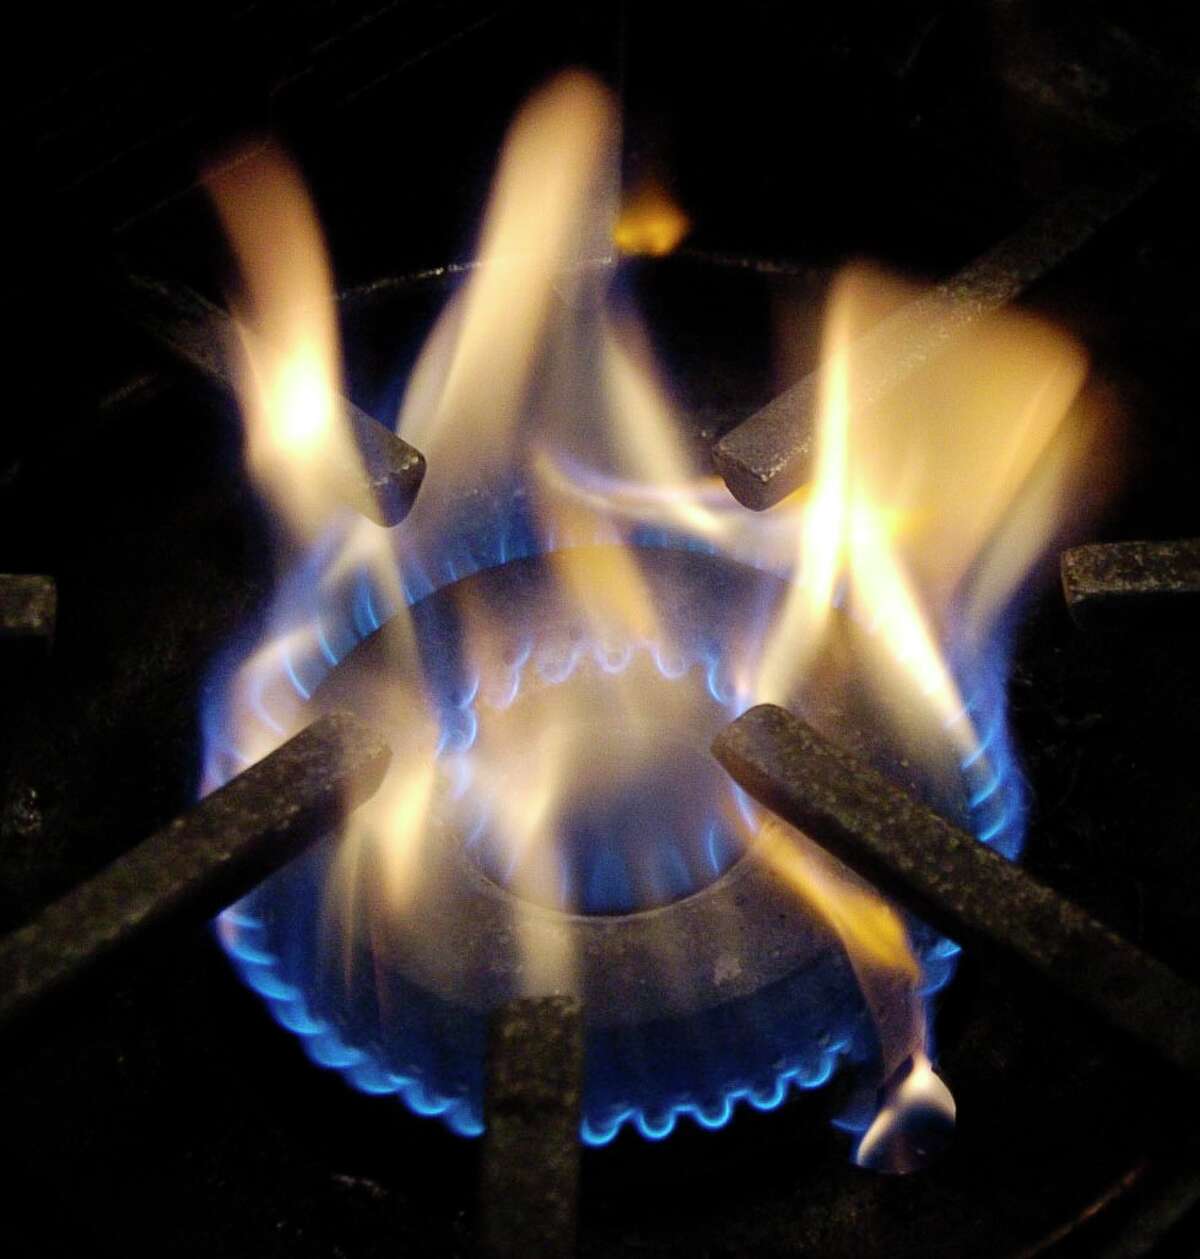 The U.S. Consumer Product Safety Commission is reviewing ways it can mitigate the hazards posed by gas stoves but has no plans to ban them, it clarified Wednesday.